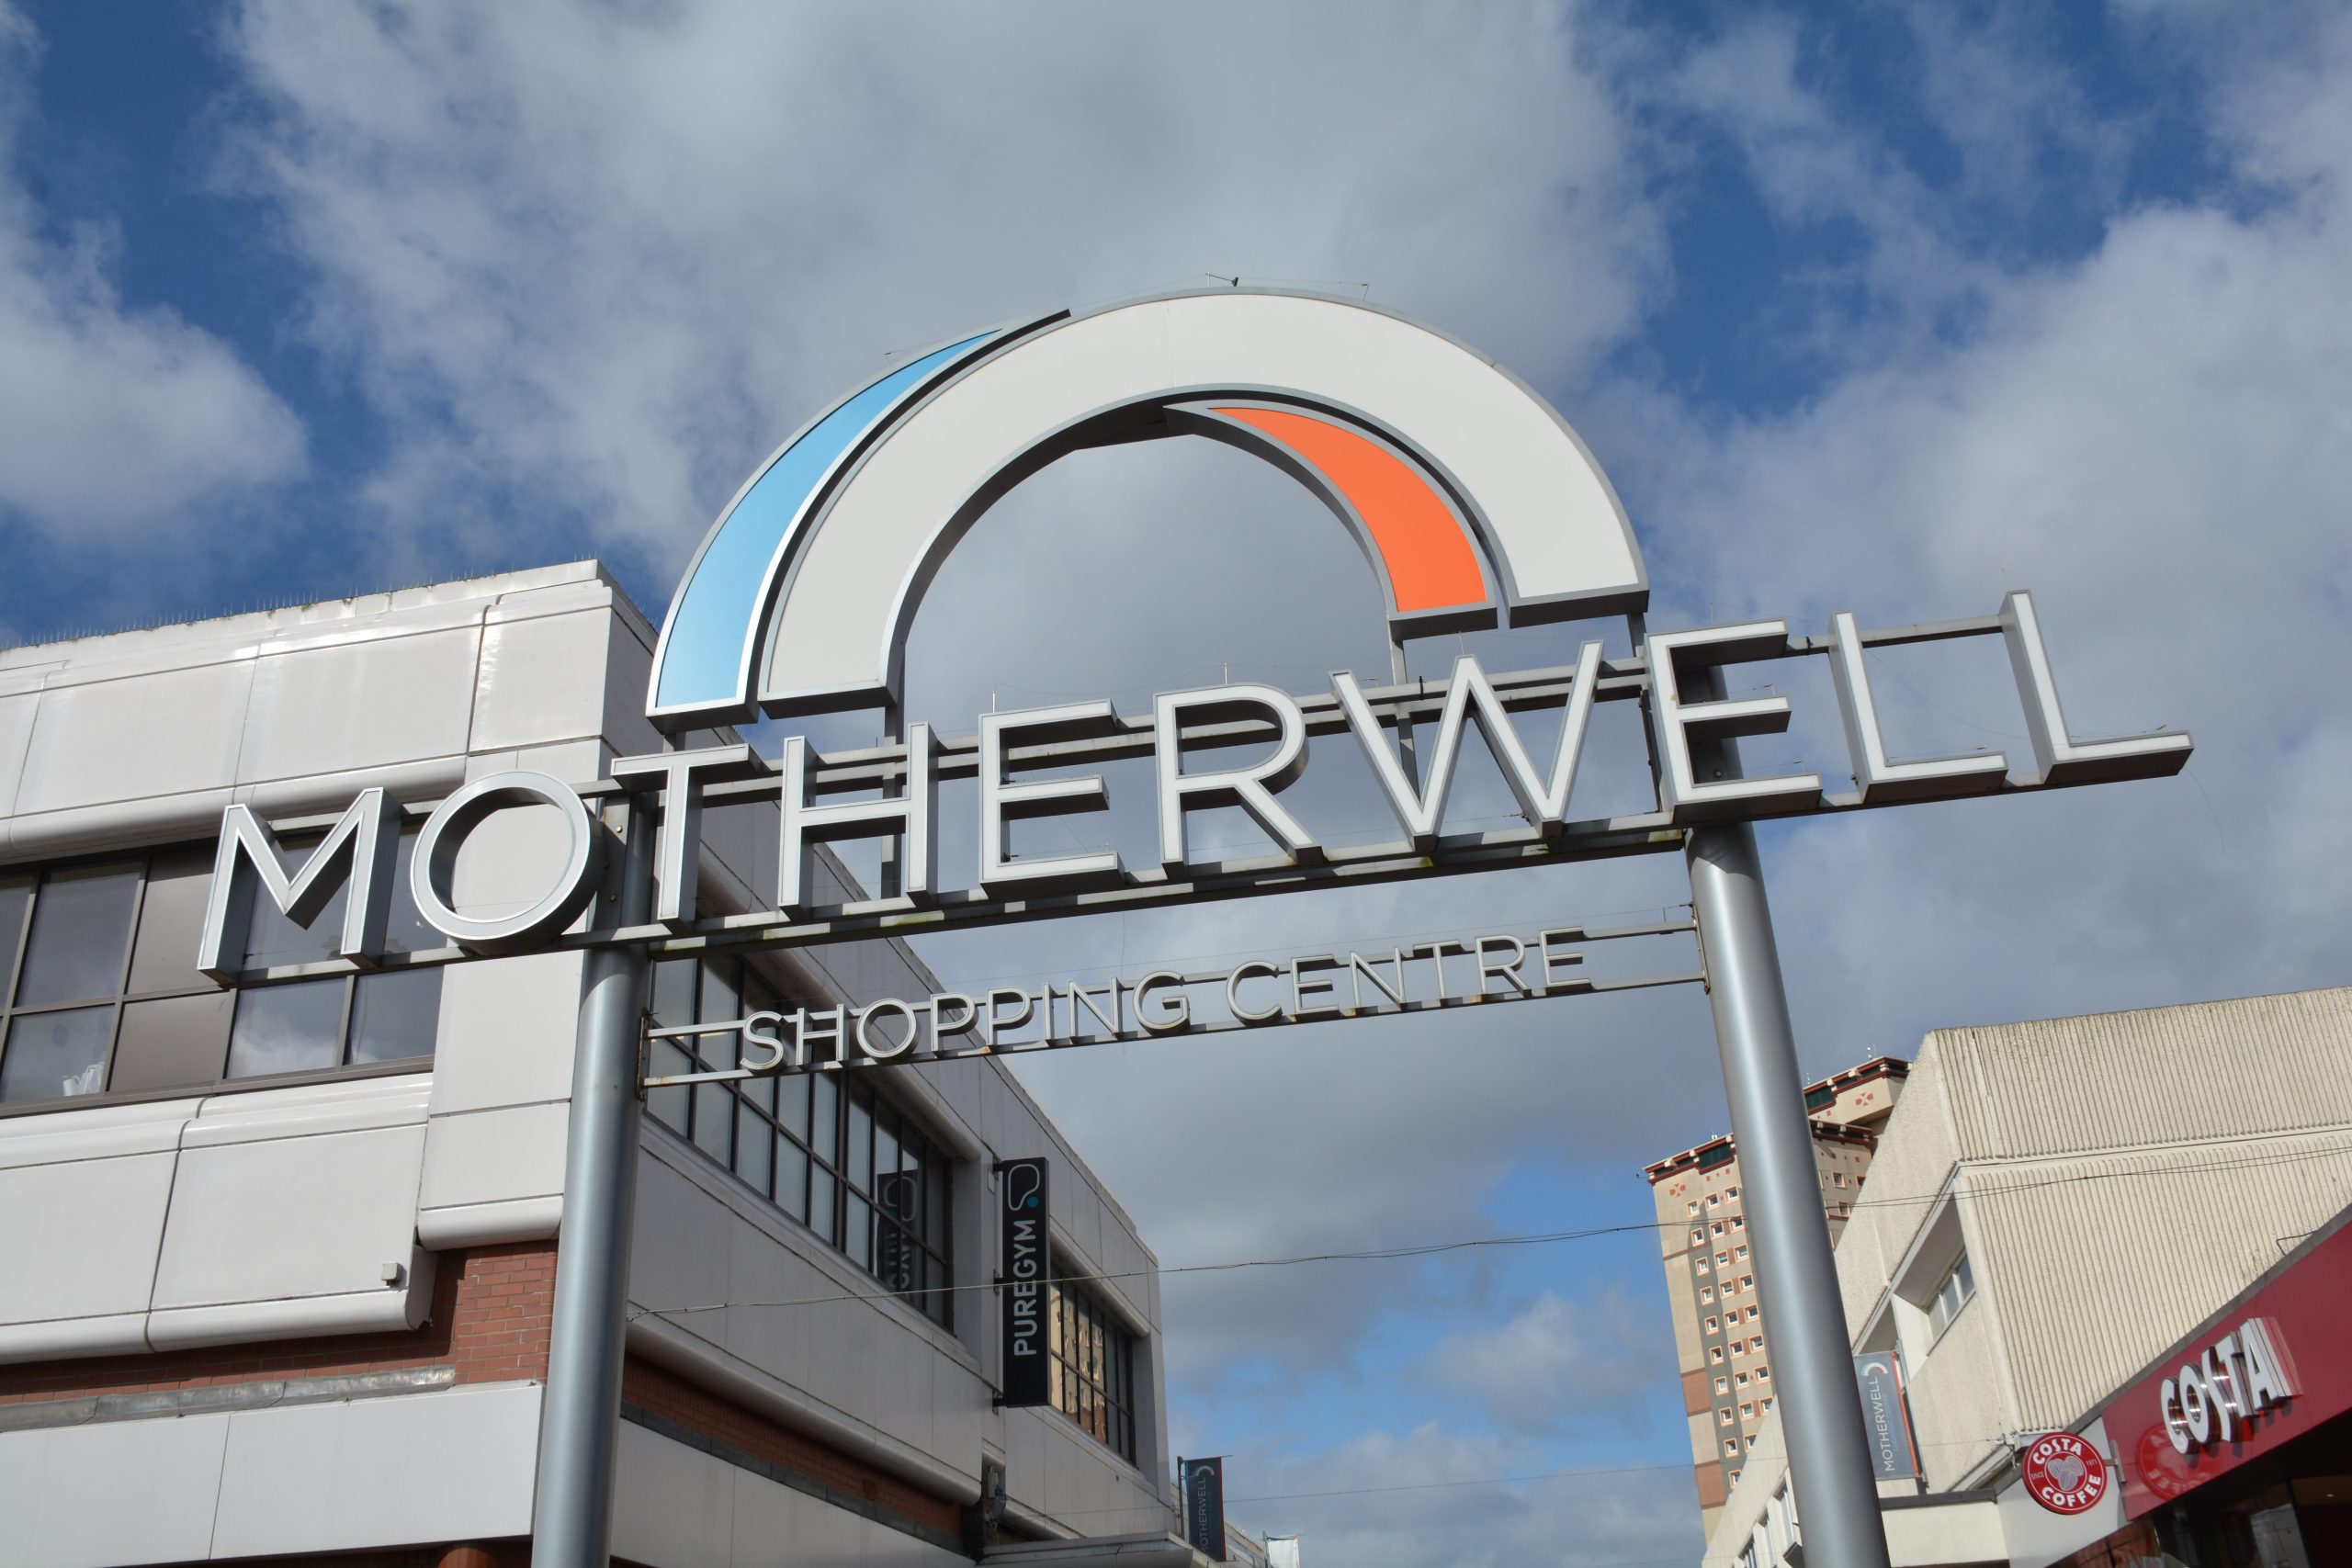 Signal Capital completes the purchase of Motherwell Shopping Centre